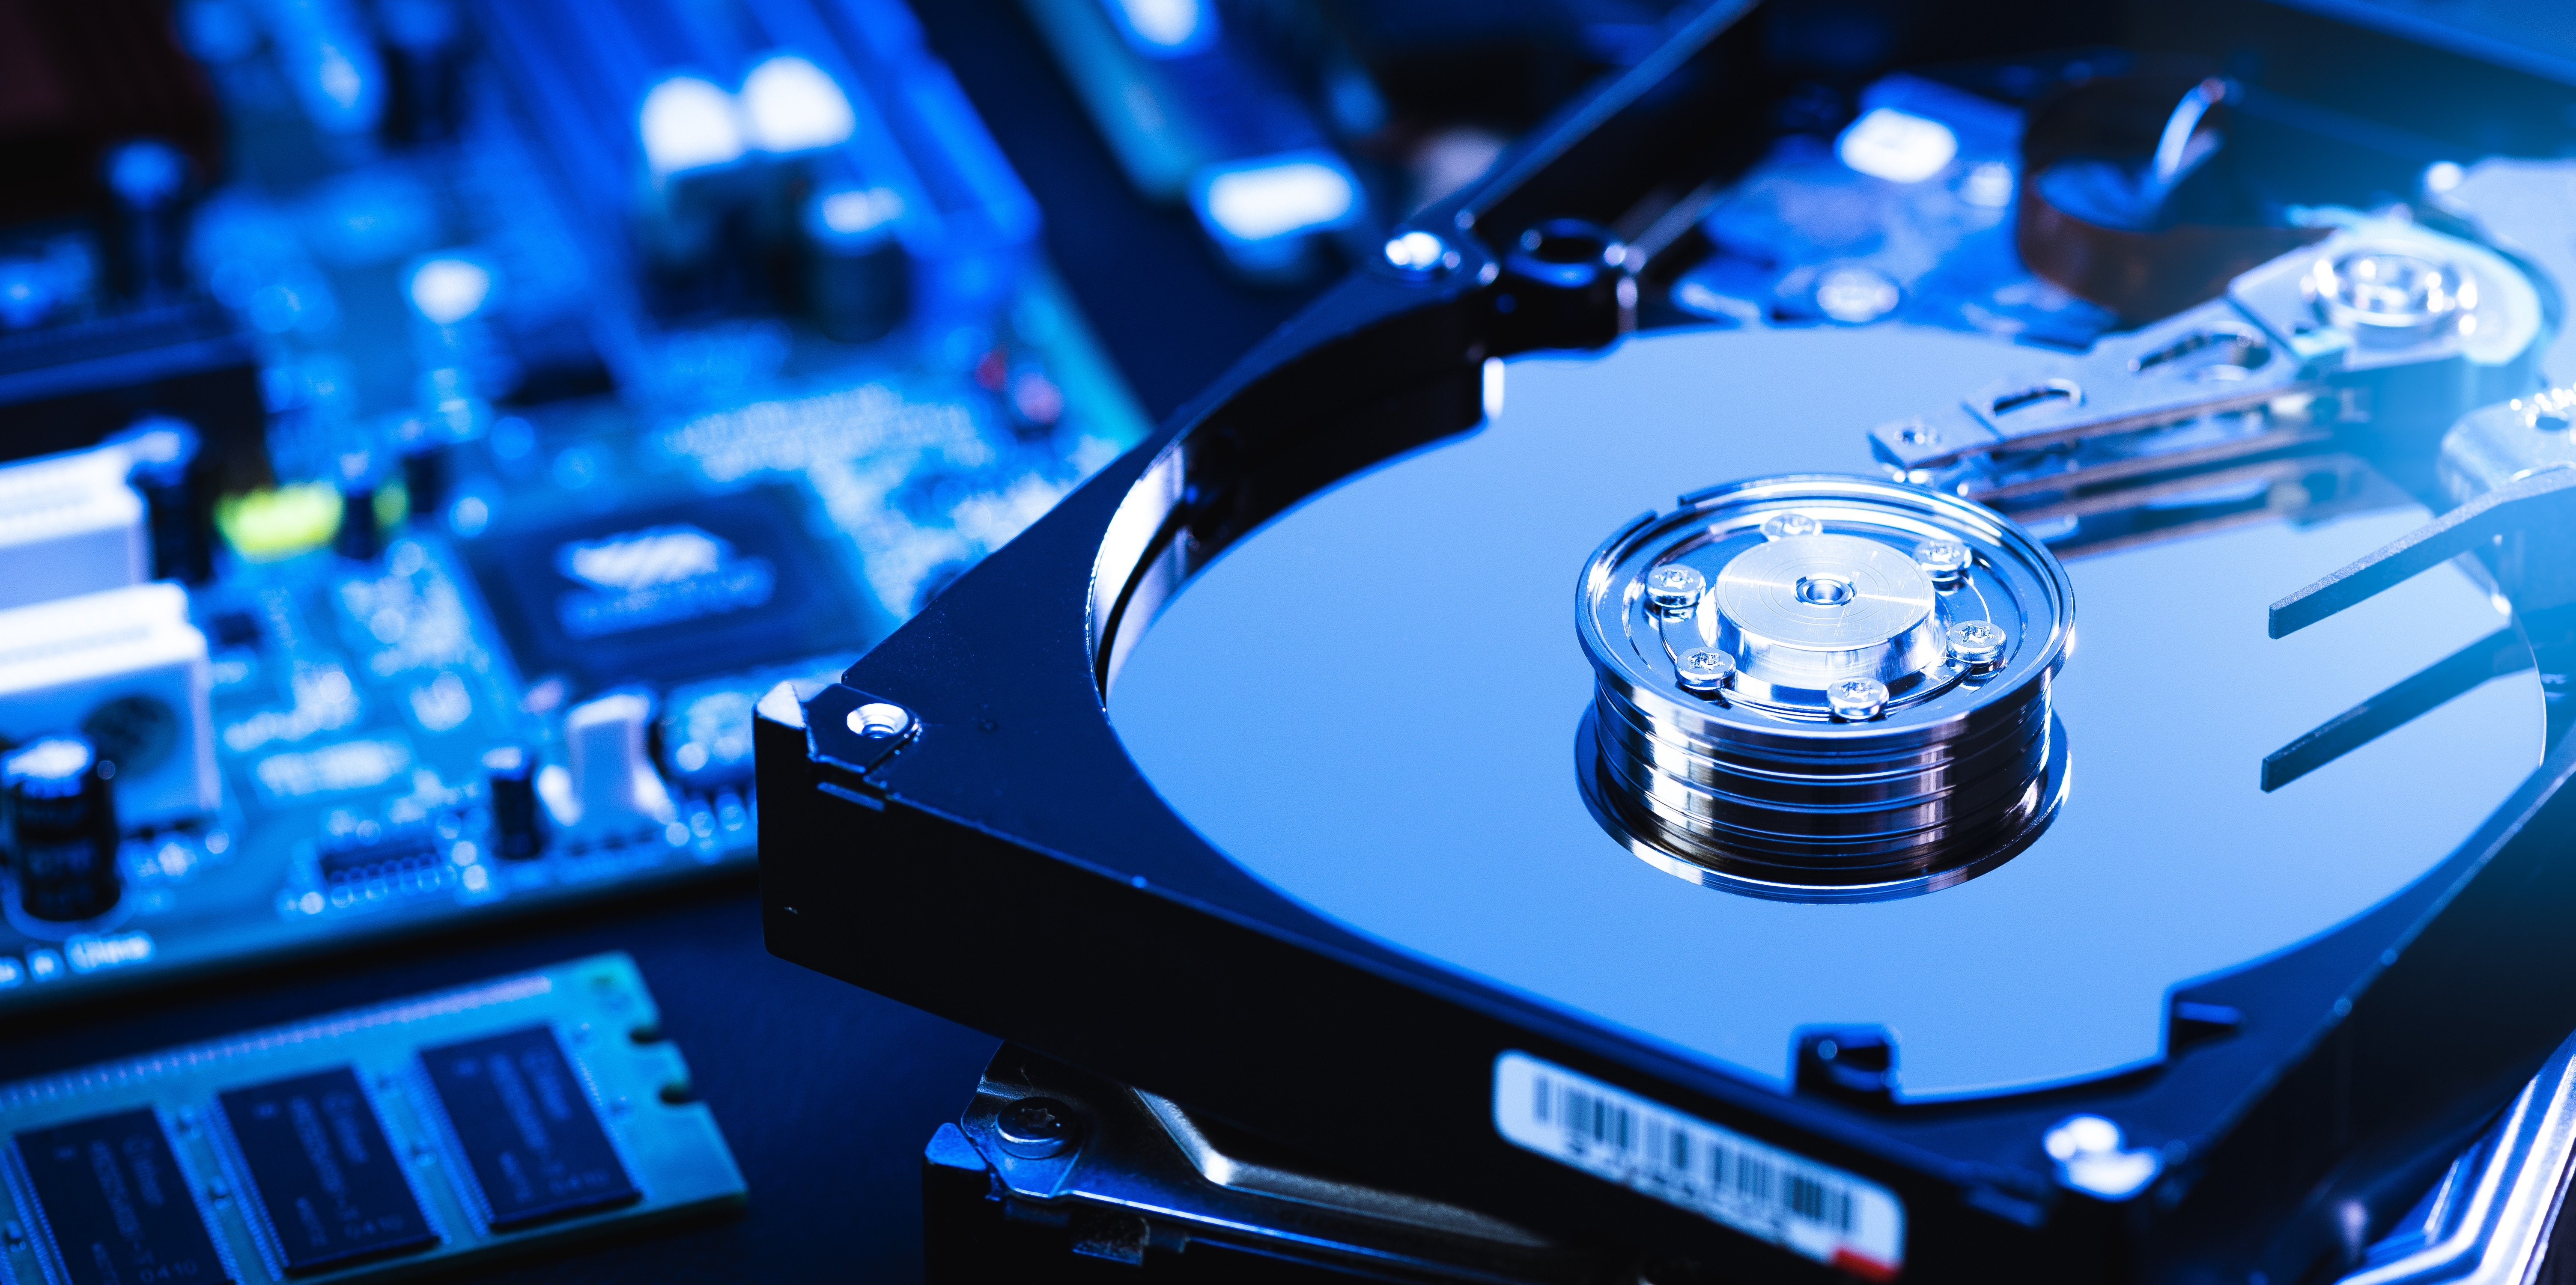 Top Manufacturers of Self-Encrypting Drives (SEDs)